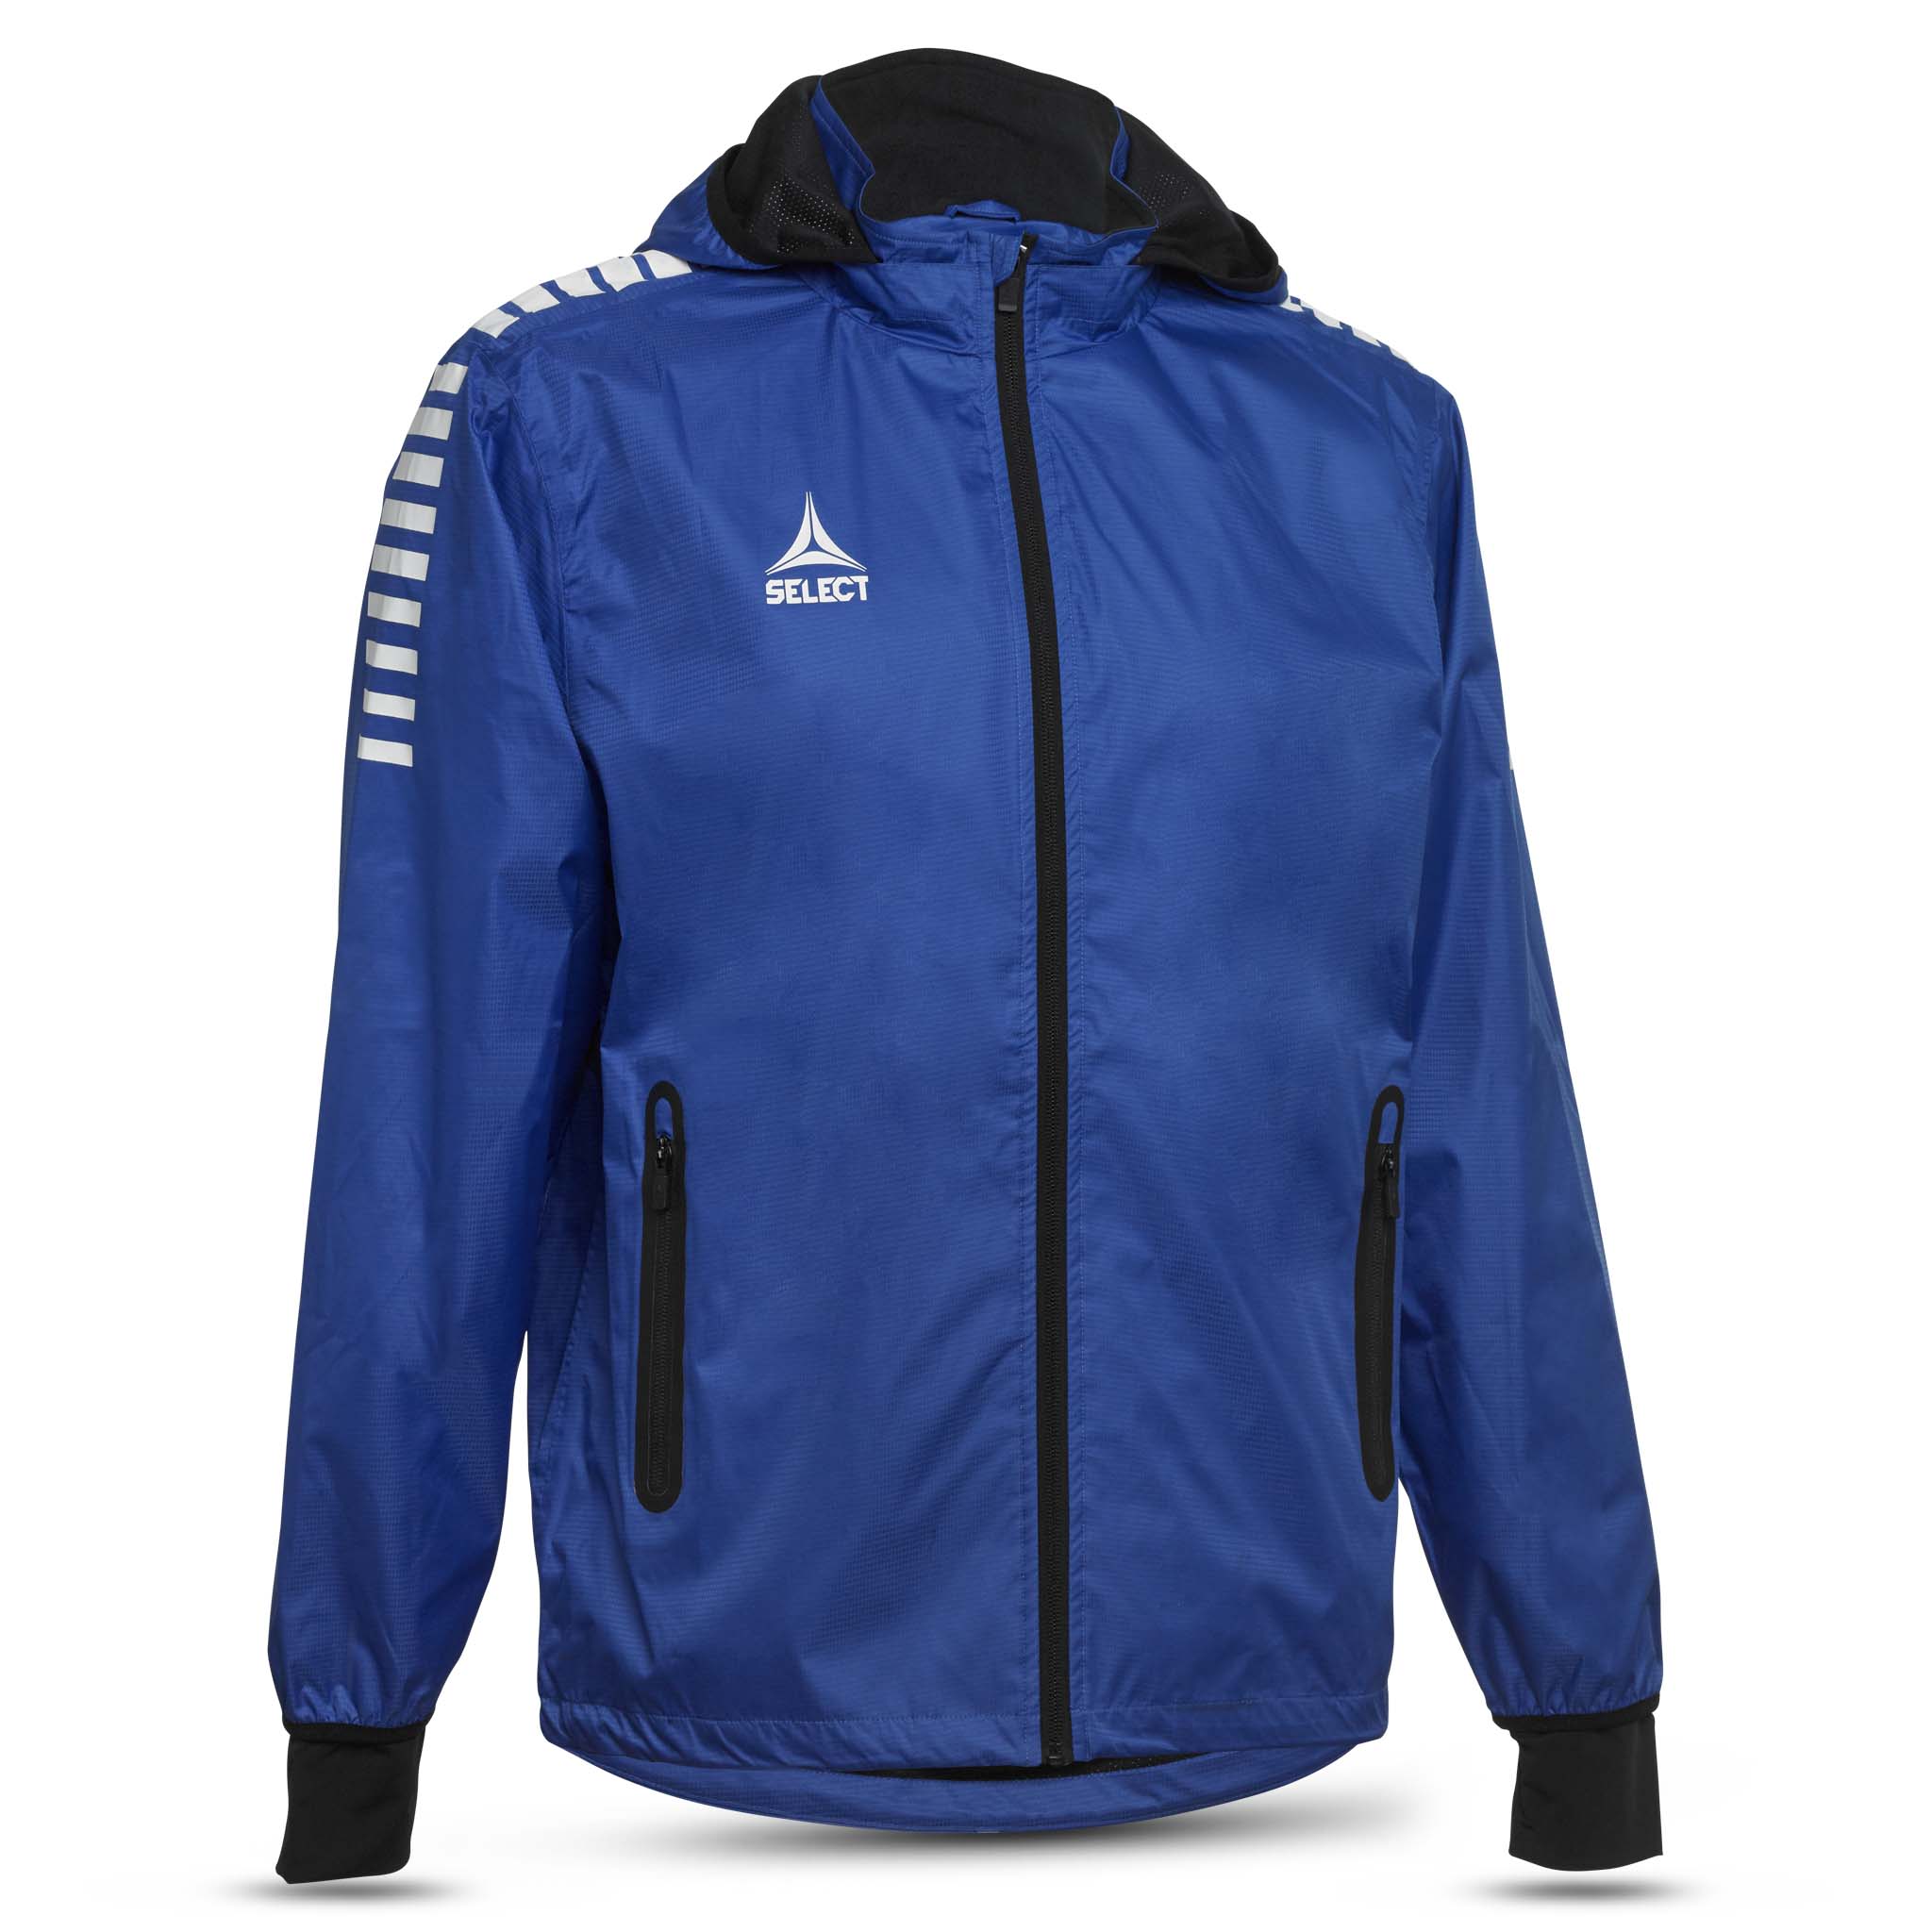 All-weather jacket - Monaco, youth #colour_blue